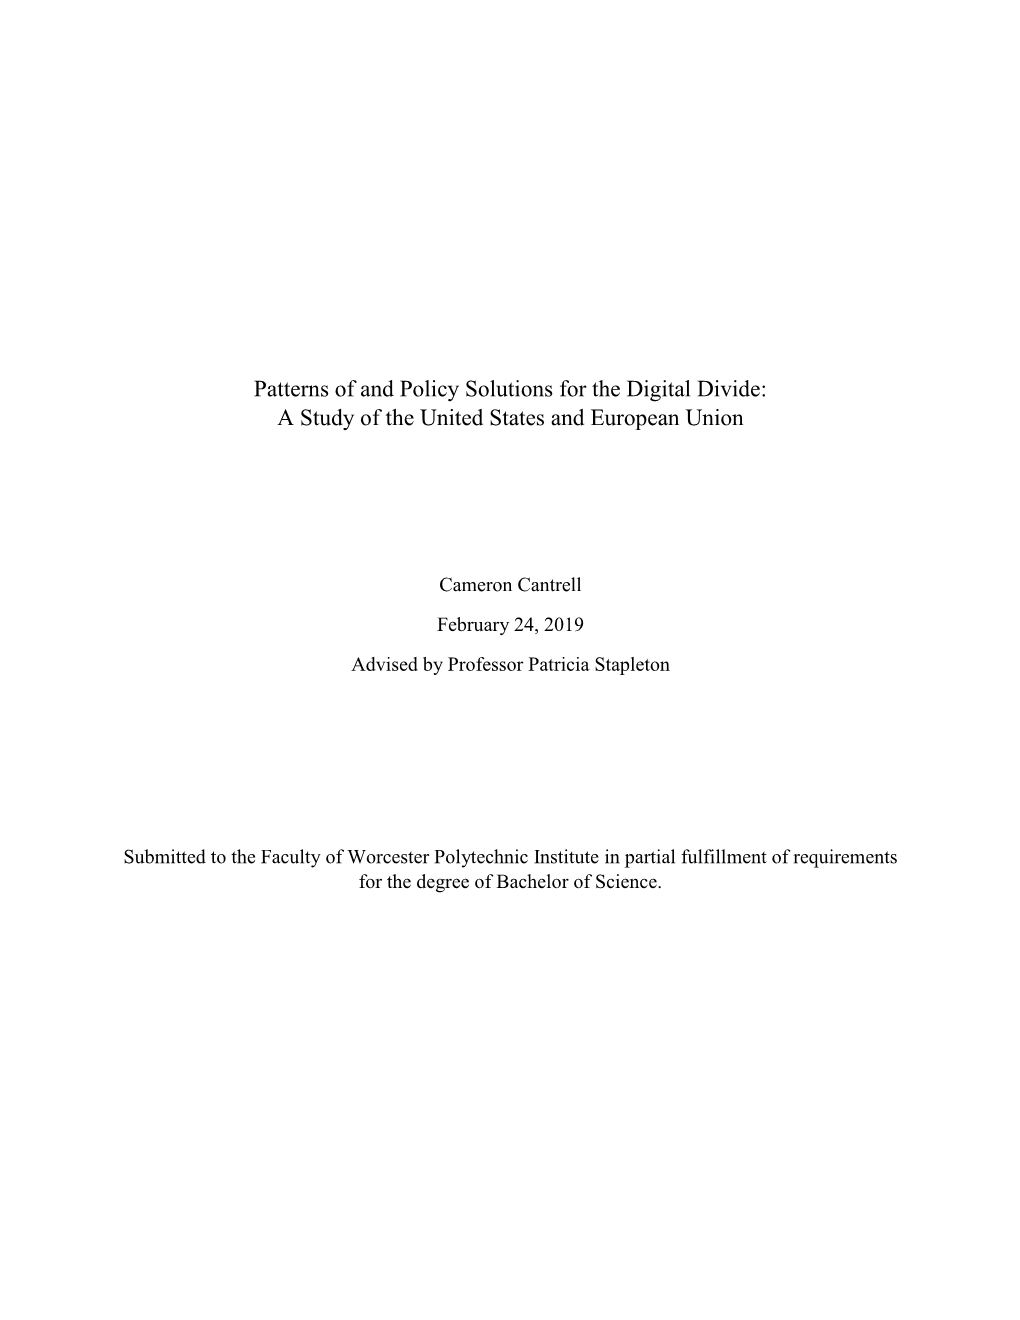 Patterns of and Policy Solutions for the Digital Divide: a Study of the United States and European Union